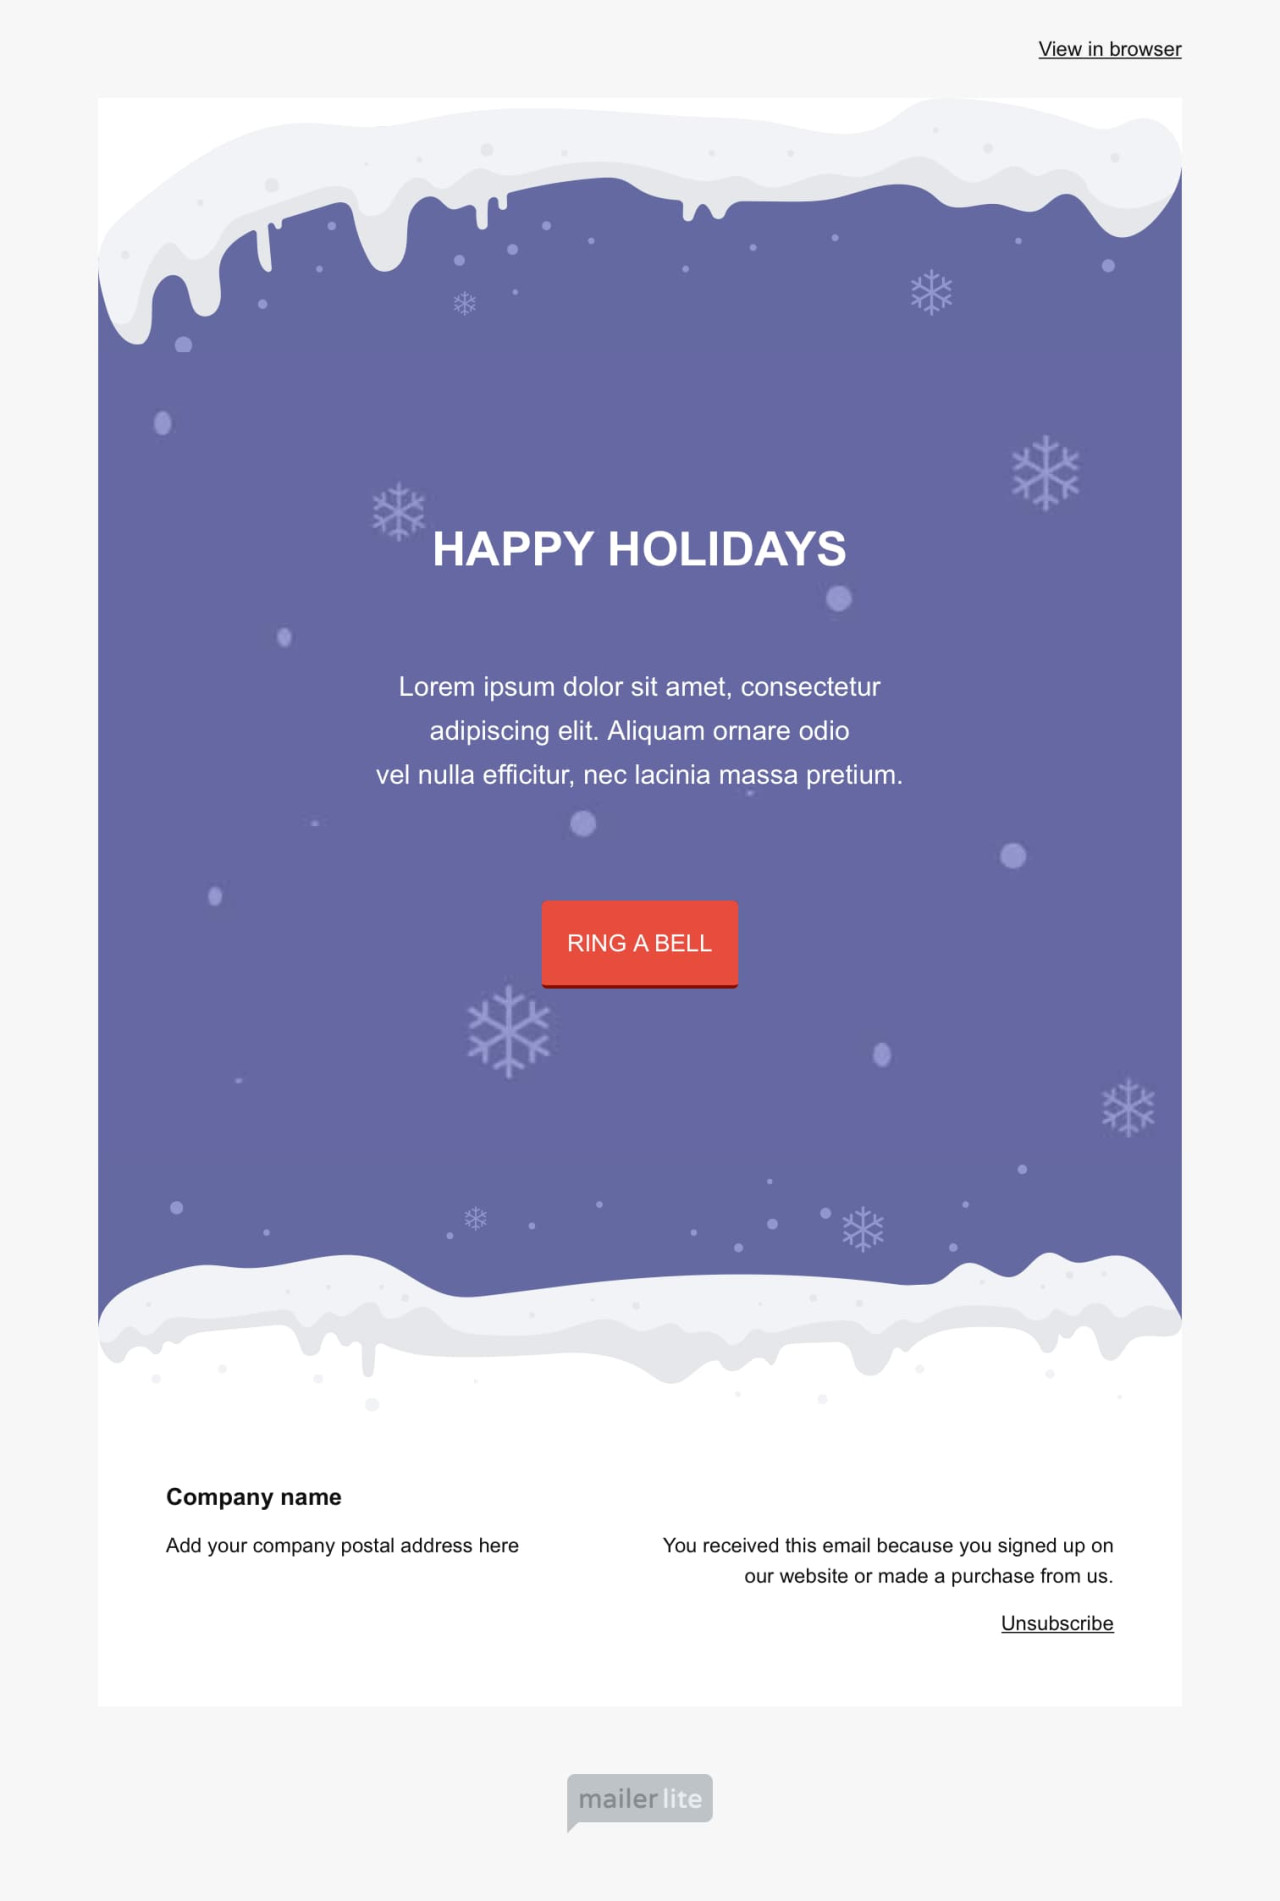 Snowy Christmas greetings email template - Made by MailerLite